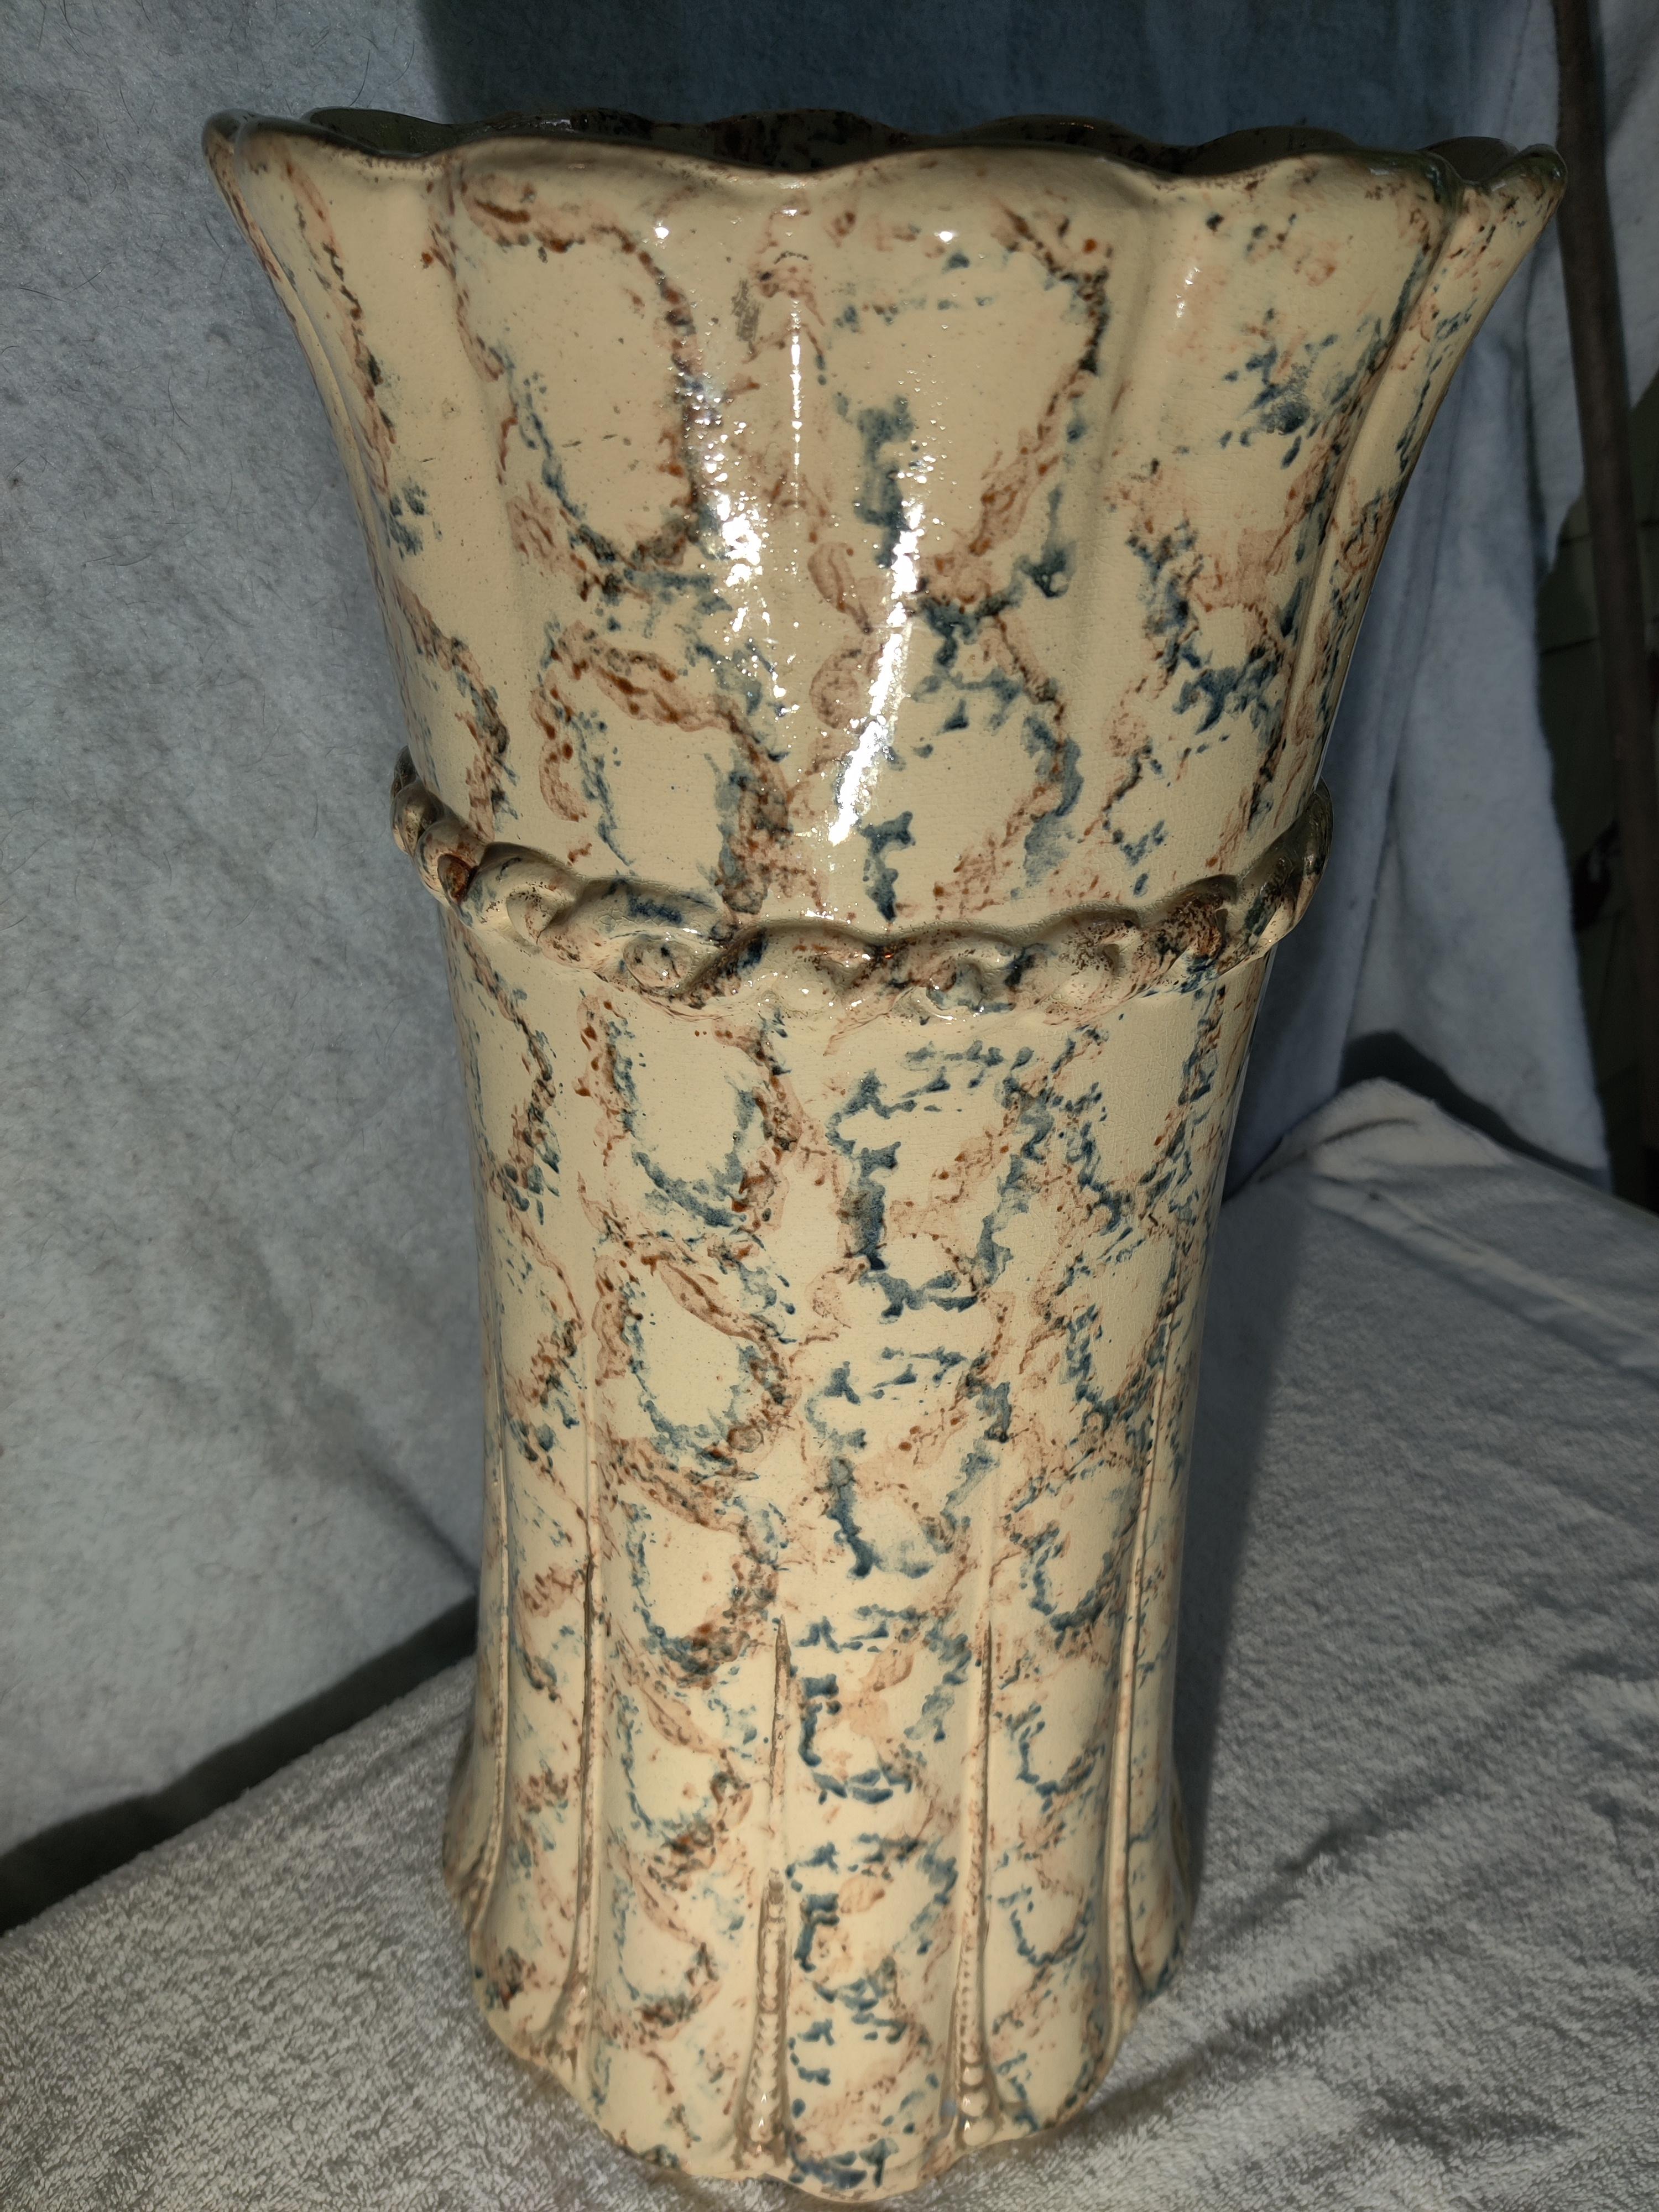 Multi-color design spongeware umbrella stand.
Cream color with blue and brown accents.
Good condition for umbrella stand.  No notable chips, scratches or other issues. 